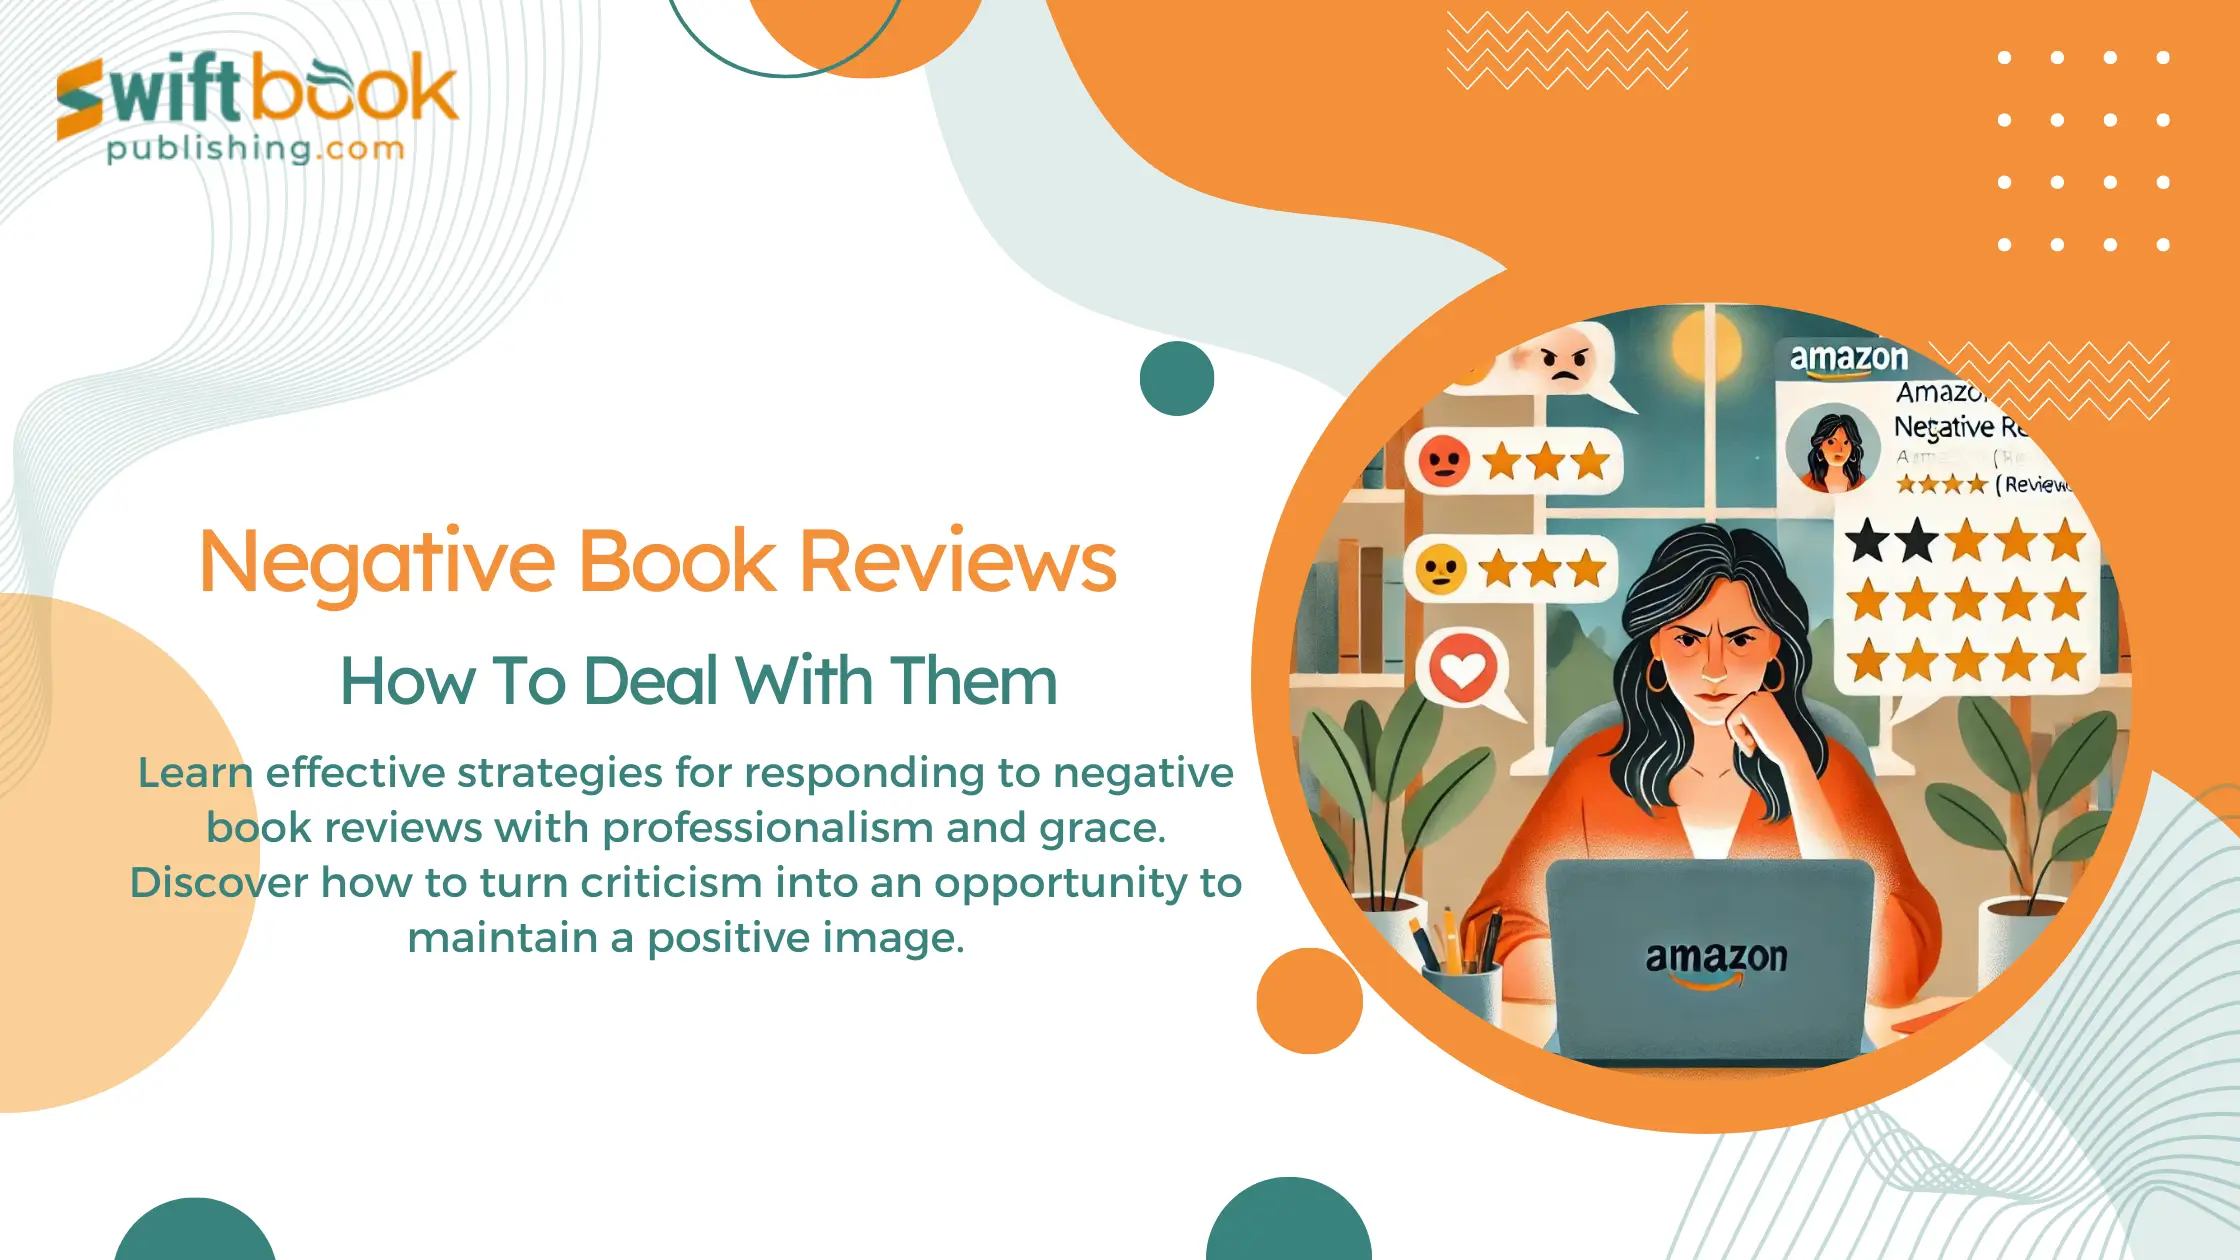 How to Deal with Negative Book Reviews